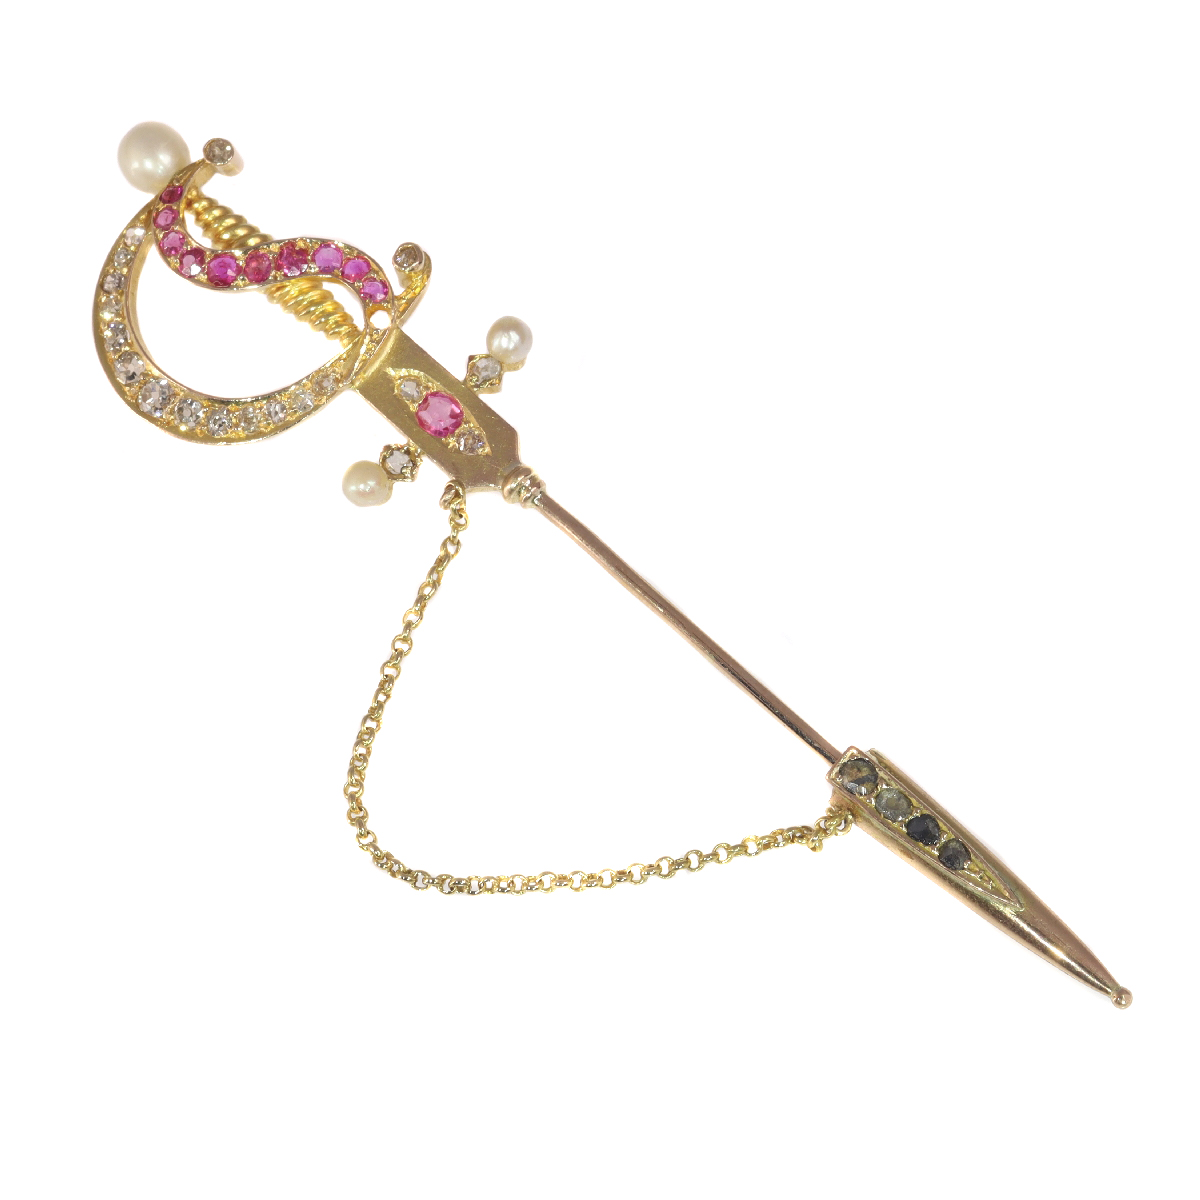 Antique gold pin in the shape of a bejeweld sword